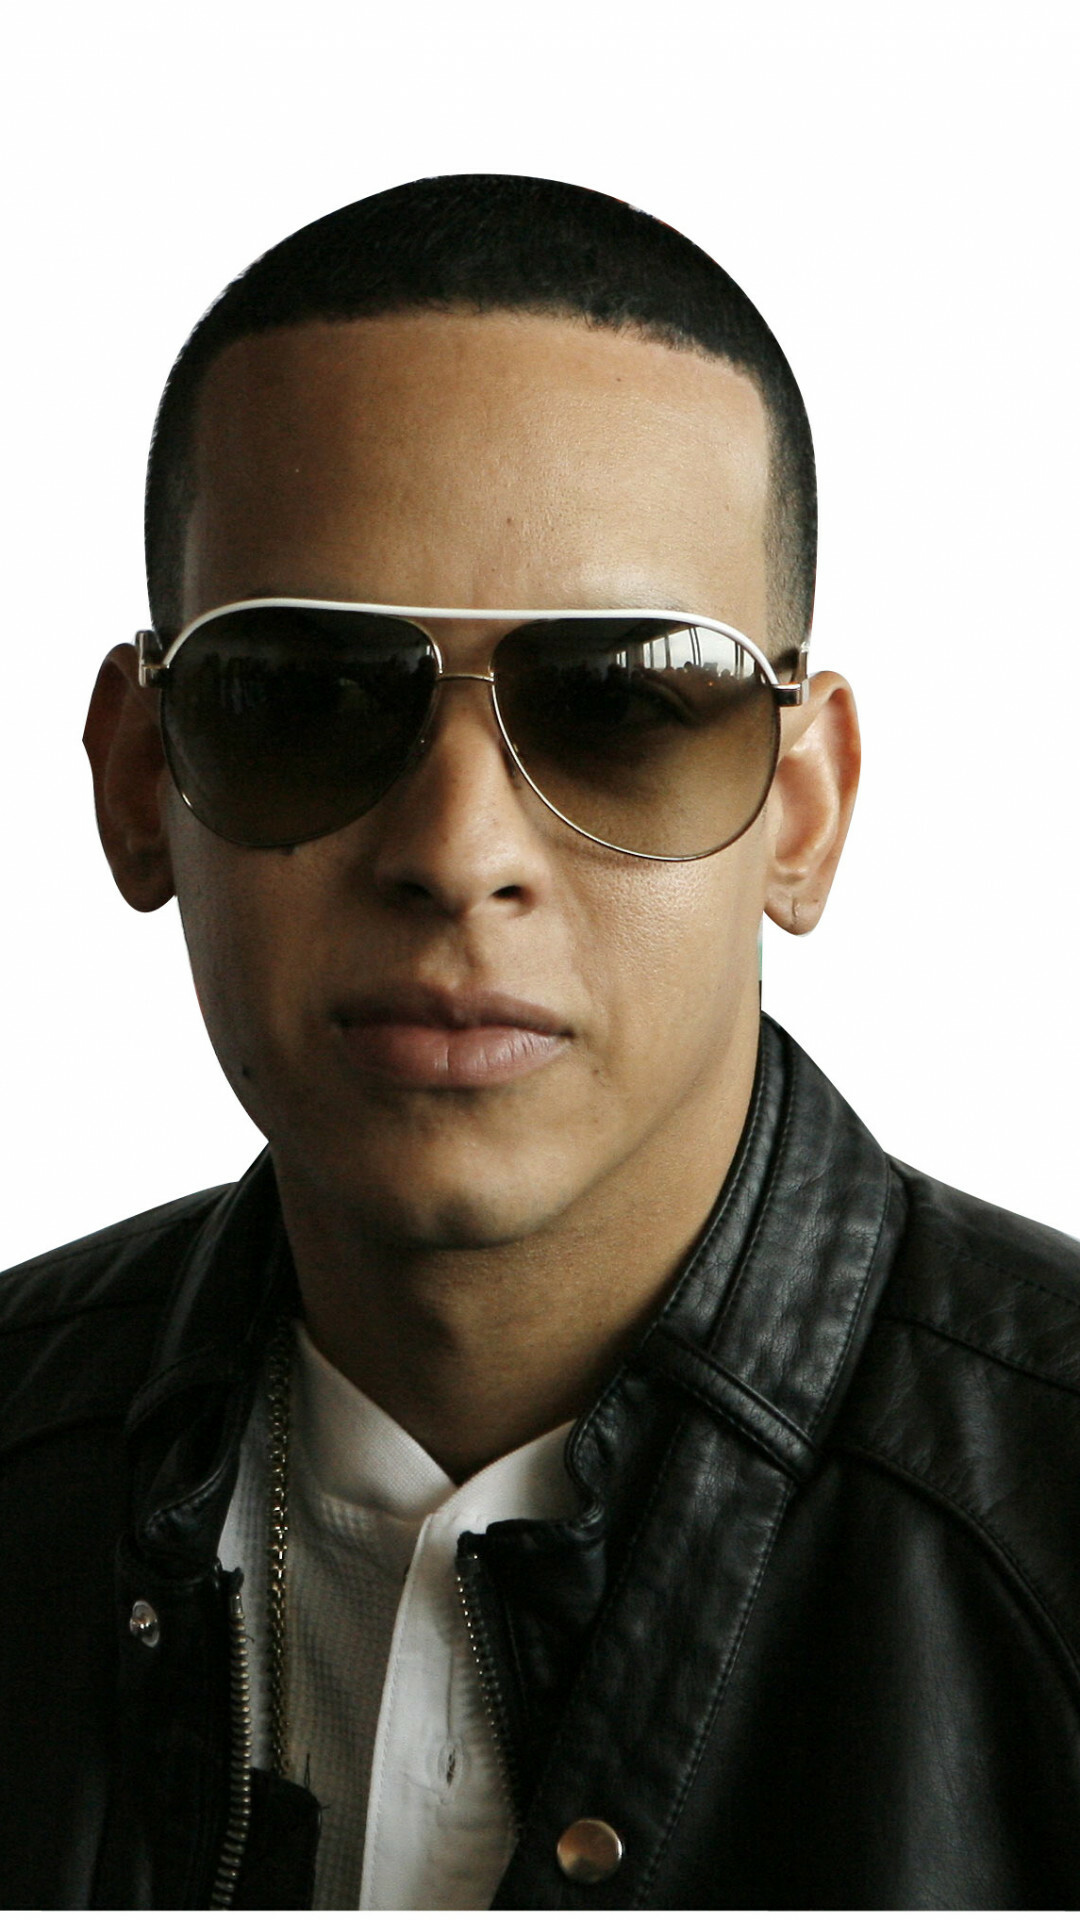 Daddy Yankee: Barrio Fino received a Billboard Music Award for Latin Album of the Year at the 16th Billboard Music Awards. 1080x1920 Full HD Wallpaper.